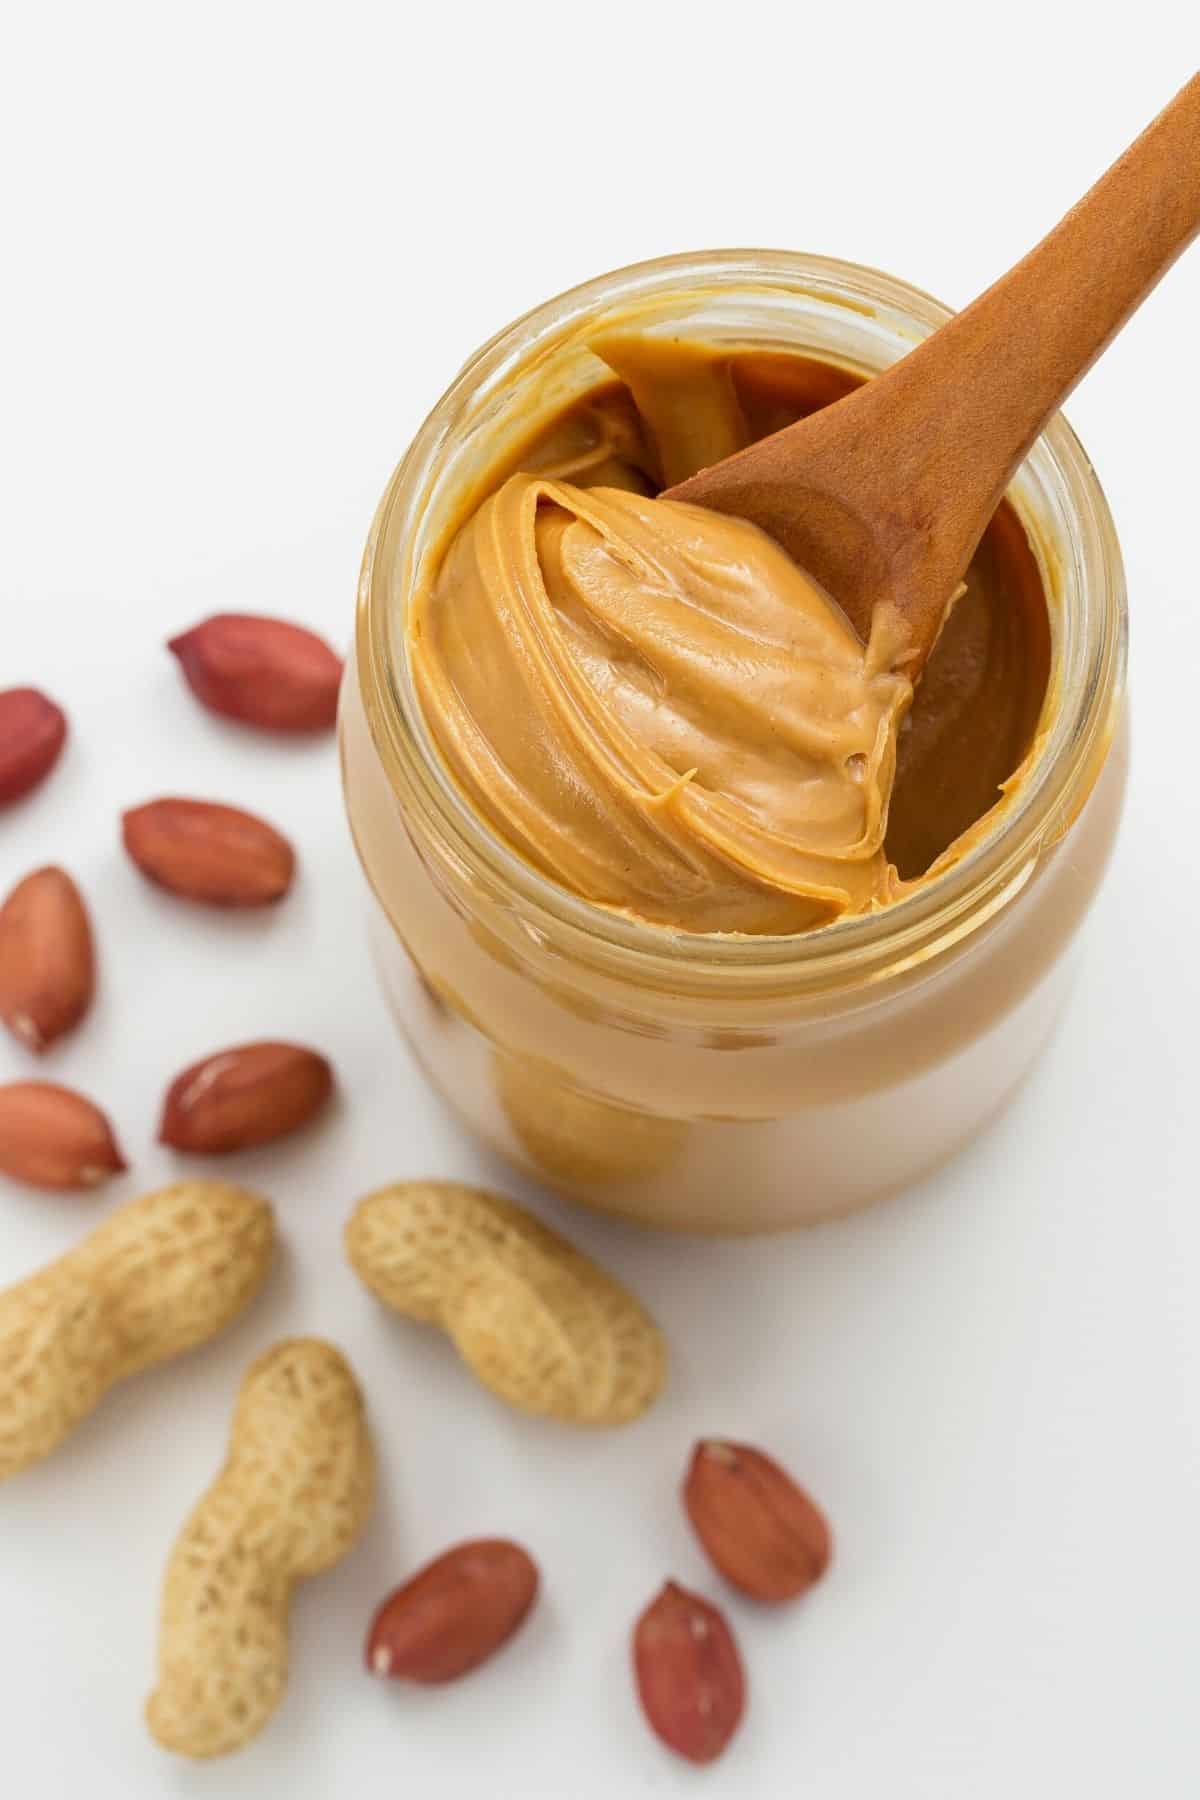 A jar of peanut butter with a spoon in it.